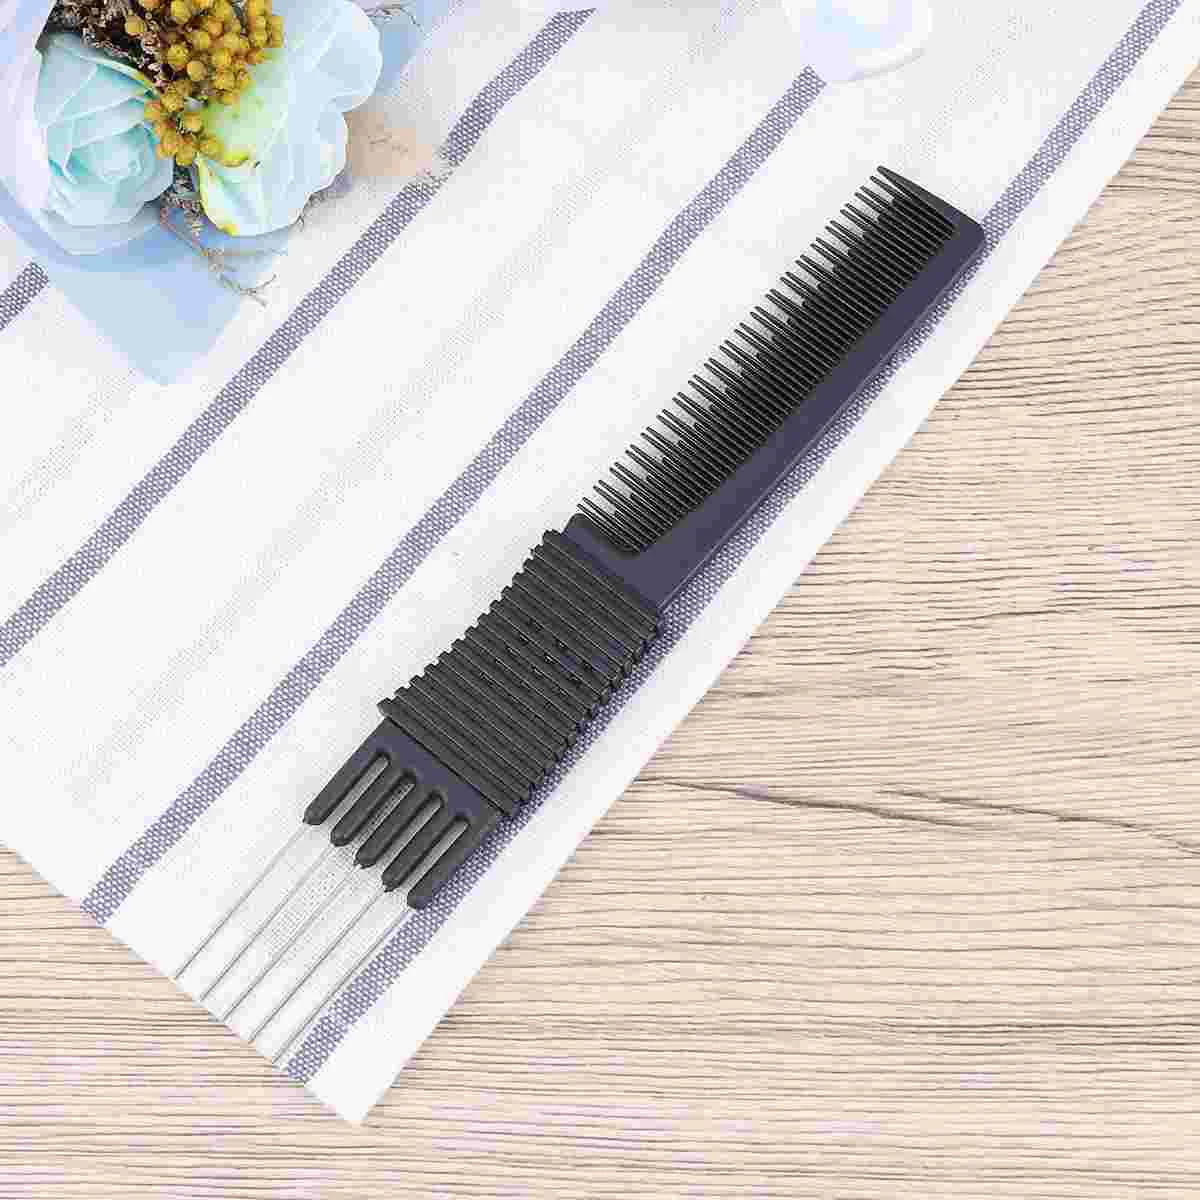 

2 Pcs Cleaning Brush Hair Tools Tooth Comb Rat-tail Stainless Steel Anti-static Haircut Pin